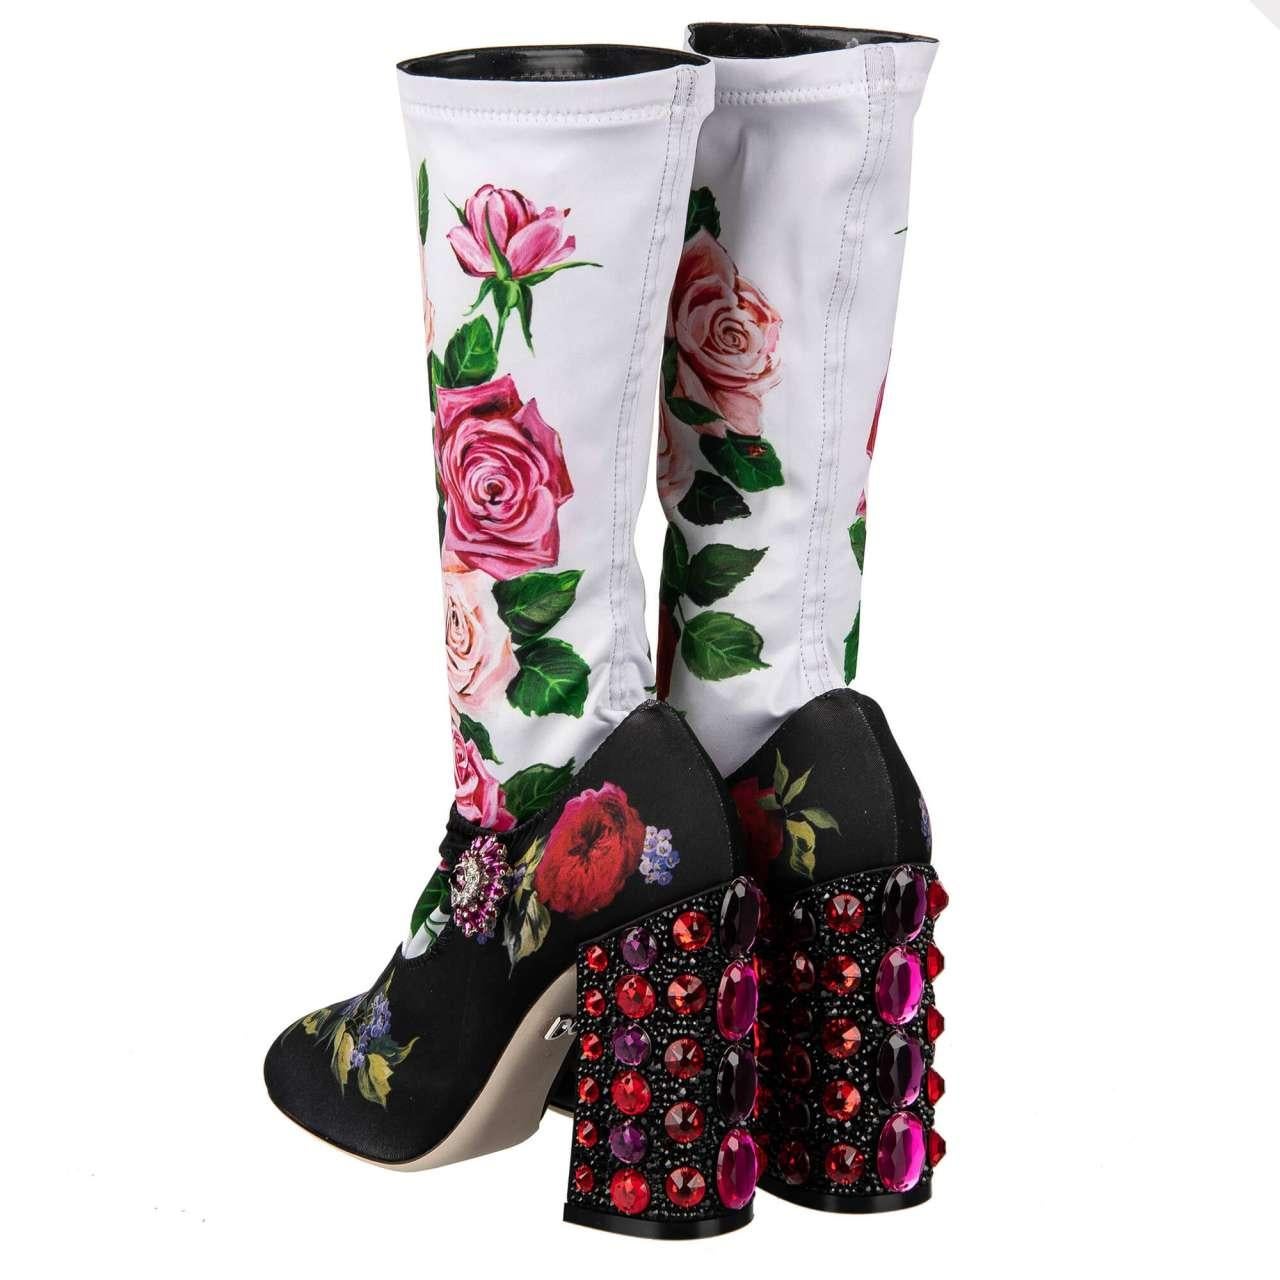 D&G Roses Printed Elastic Socks Pumps VALLY with Crystals Heel Black White 36 In Excellent Condition For Sale In Erkrath, DE